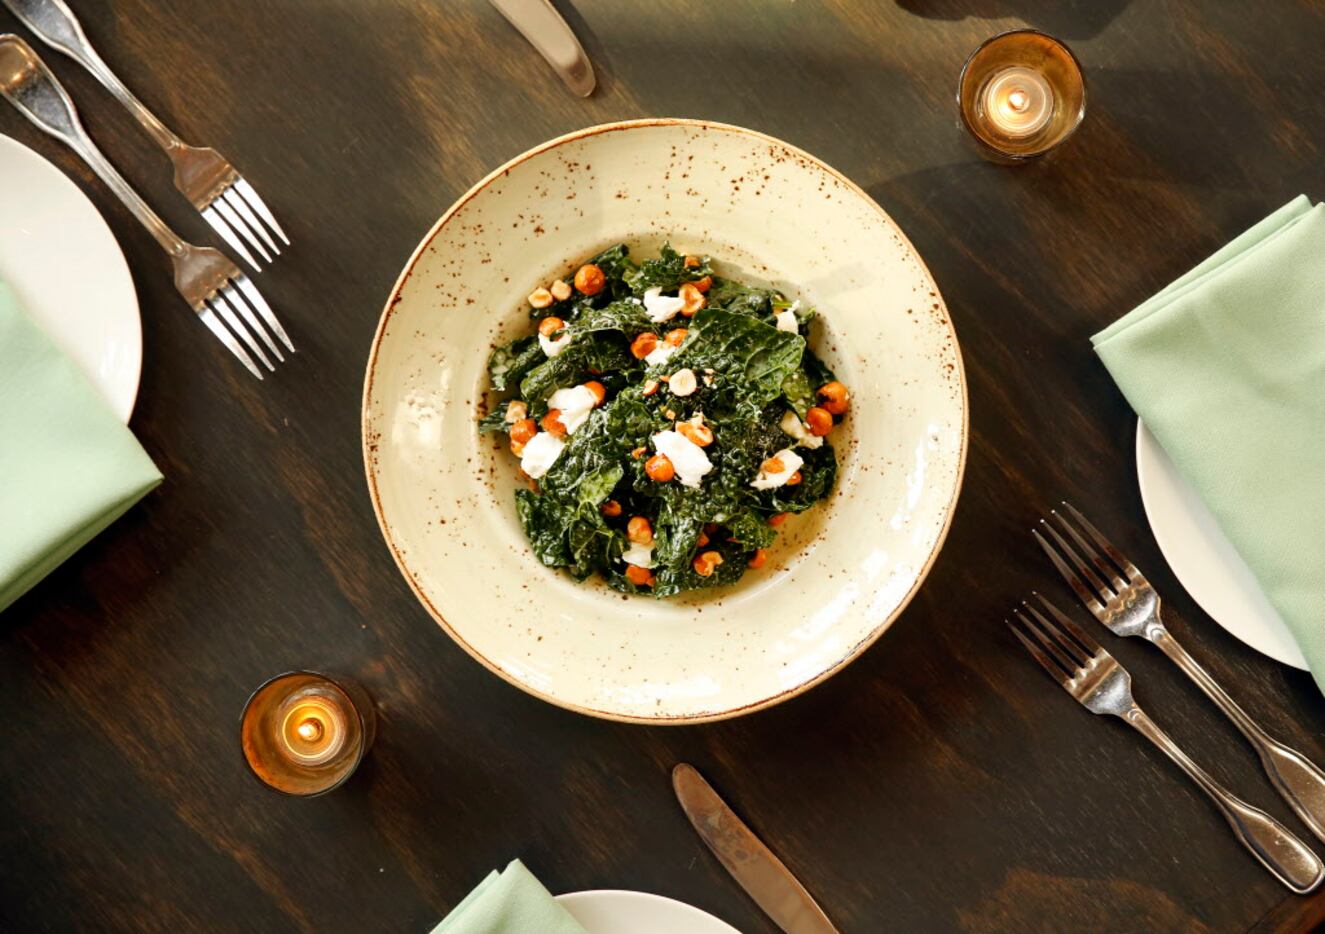 Remedy chef Danyele McPherson prepared lacinato kale salad with house-made ricotta and...